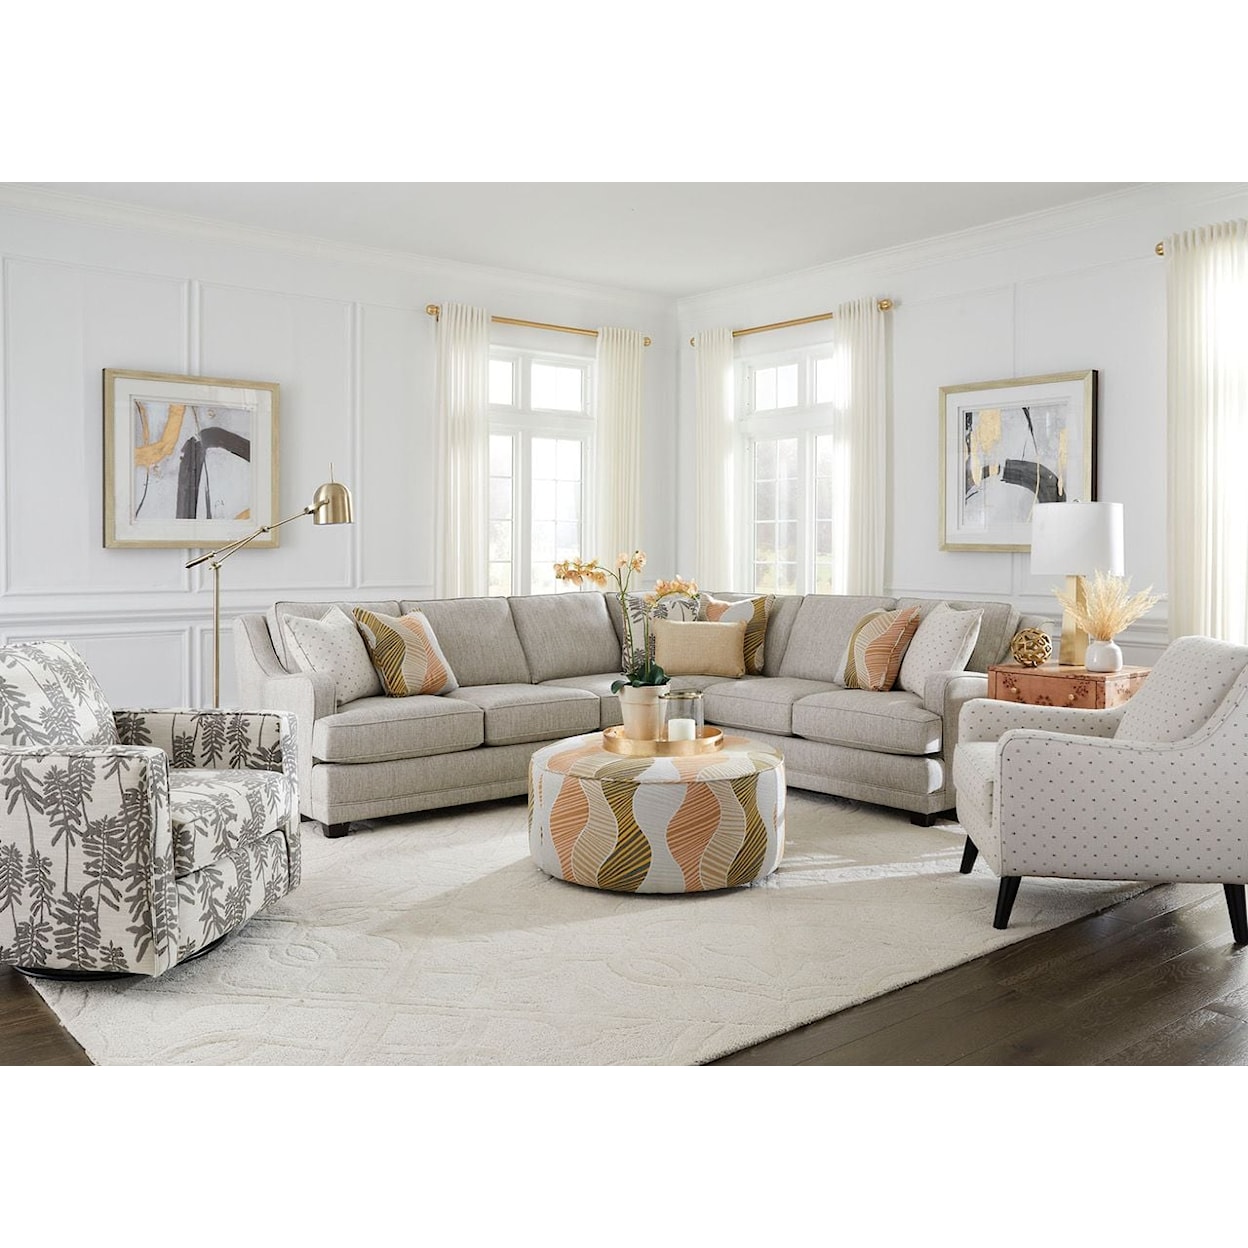 Fusion Furniture 7000 LOXLEY COCONUT Living Room Set